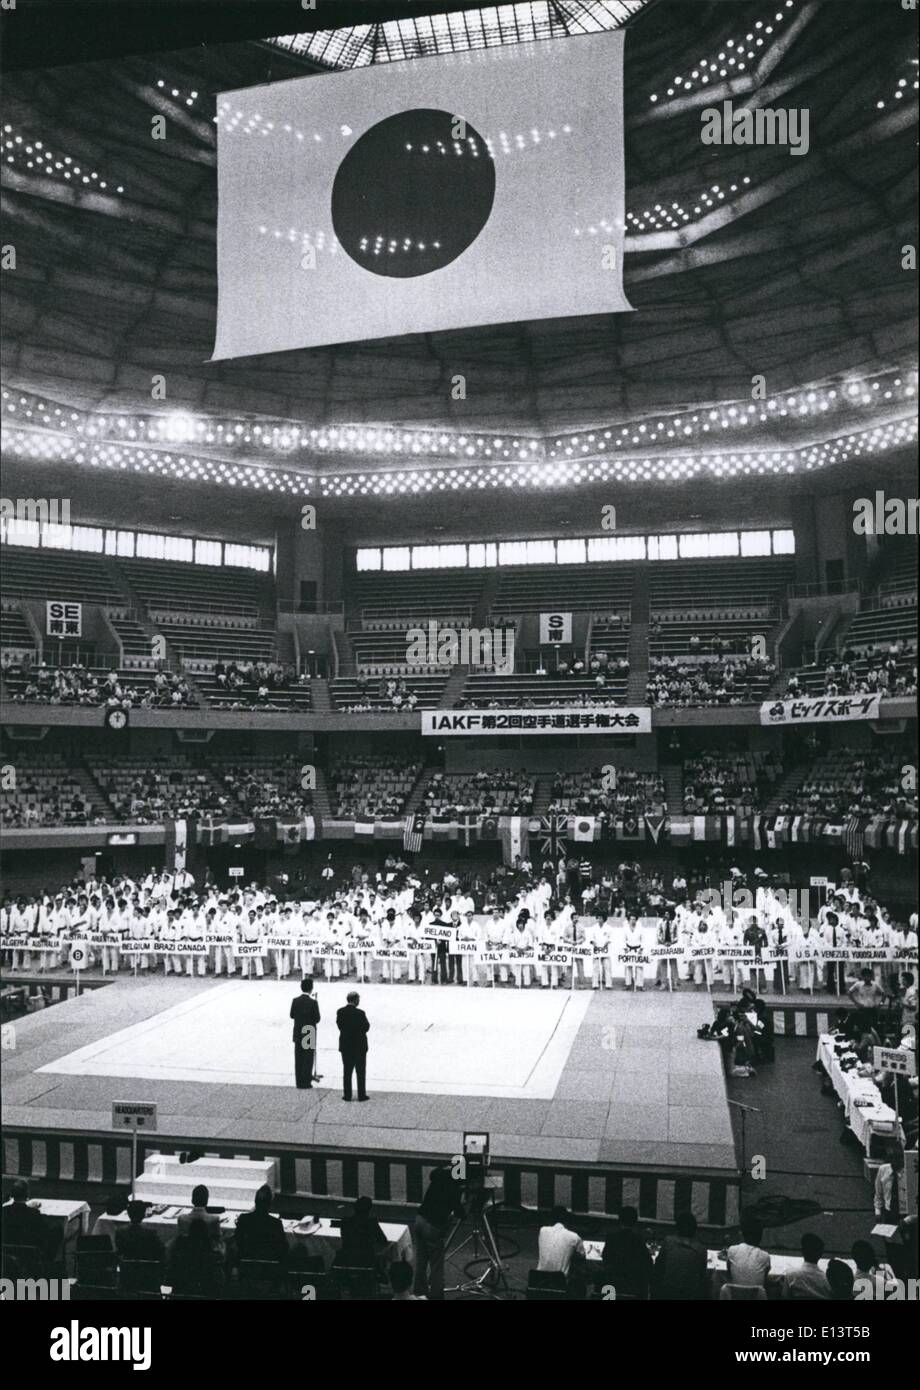 Mar. 27, 2012 - International Amateur Karate Federation Second world Championship The second world Championship was held recently in Tokyo's Budokan (July 2. 1977) with participation from 18 countries. After a very lively contest the Japanese carried off the first place with West Germany close behind and Great Britain taking third place. Photo 5 The opening Ceremony. Stock Photo